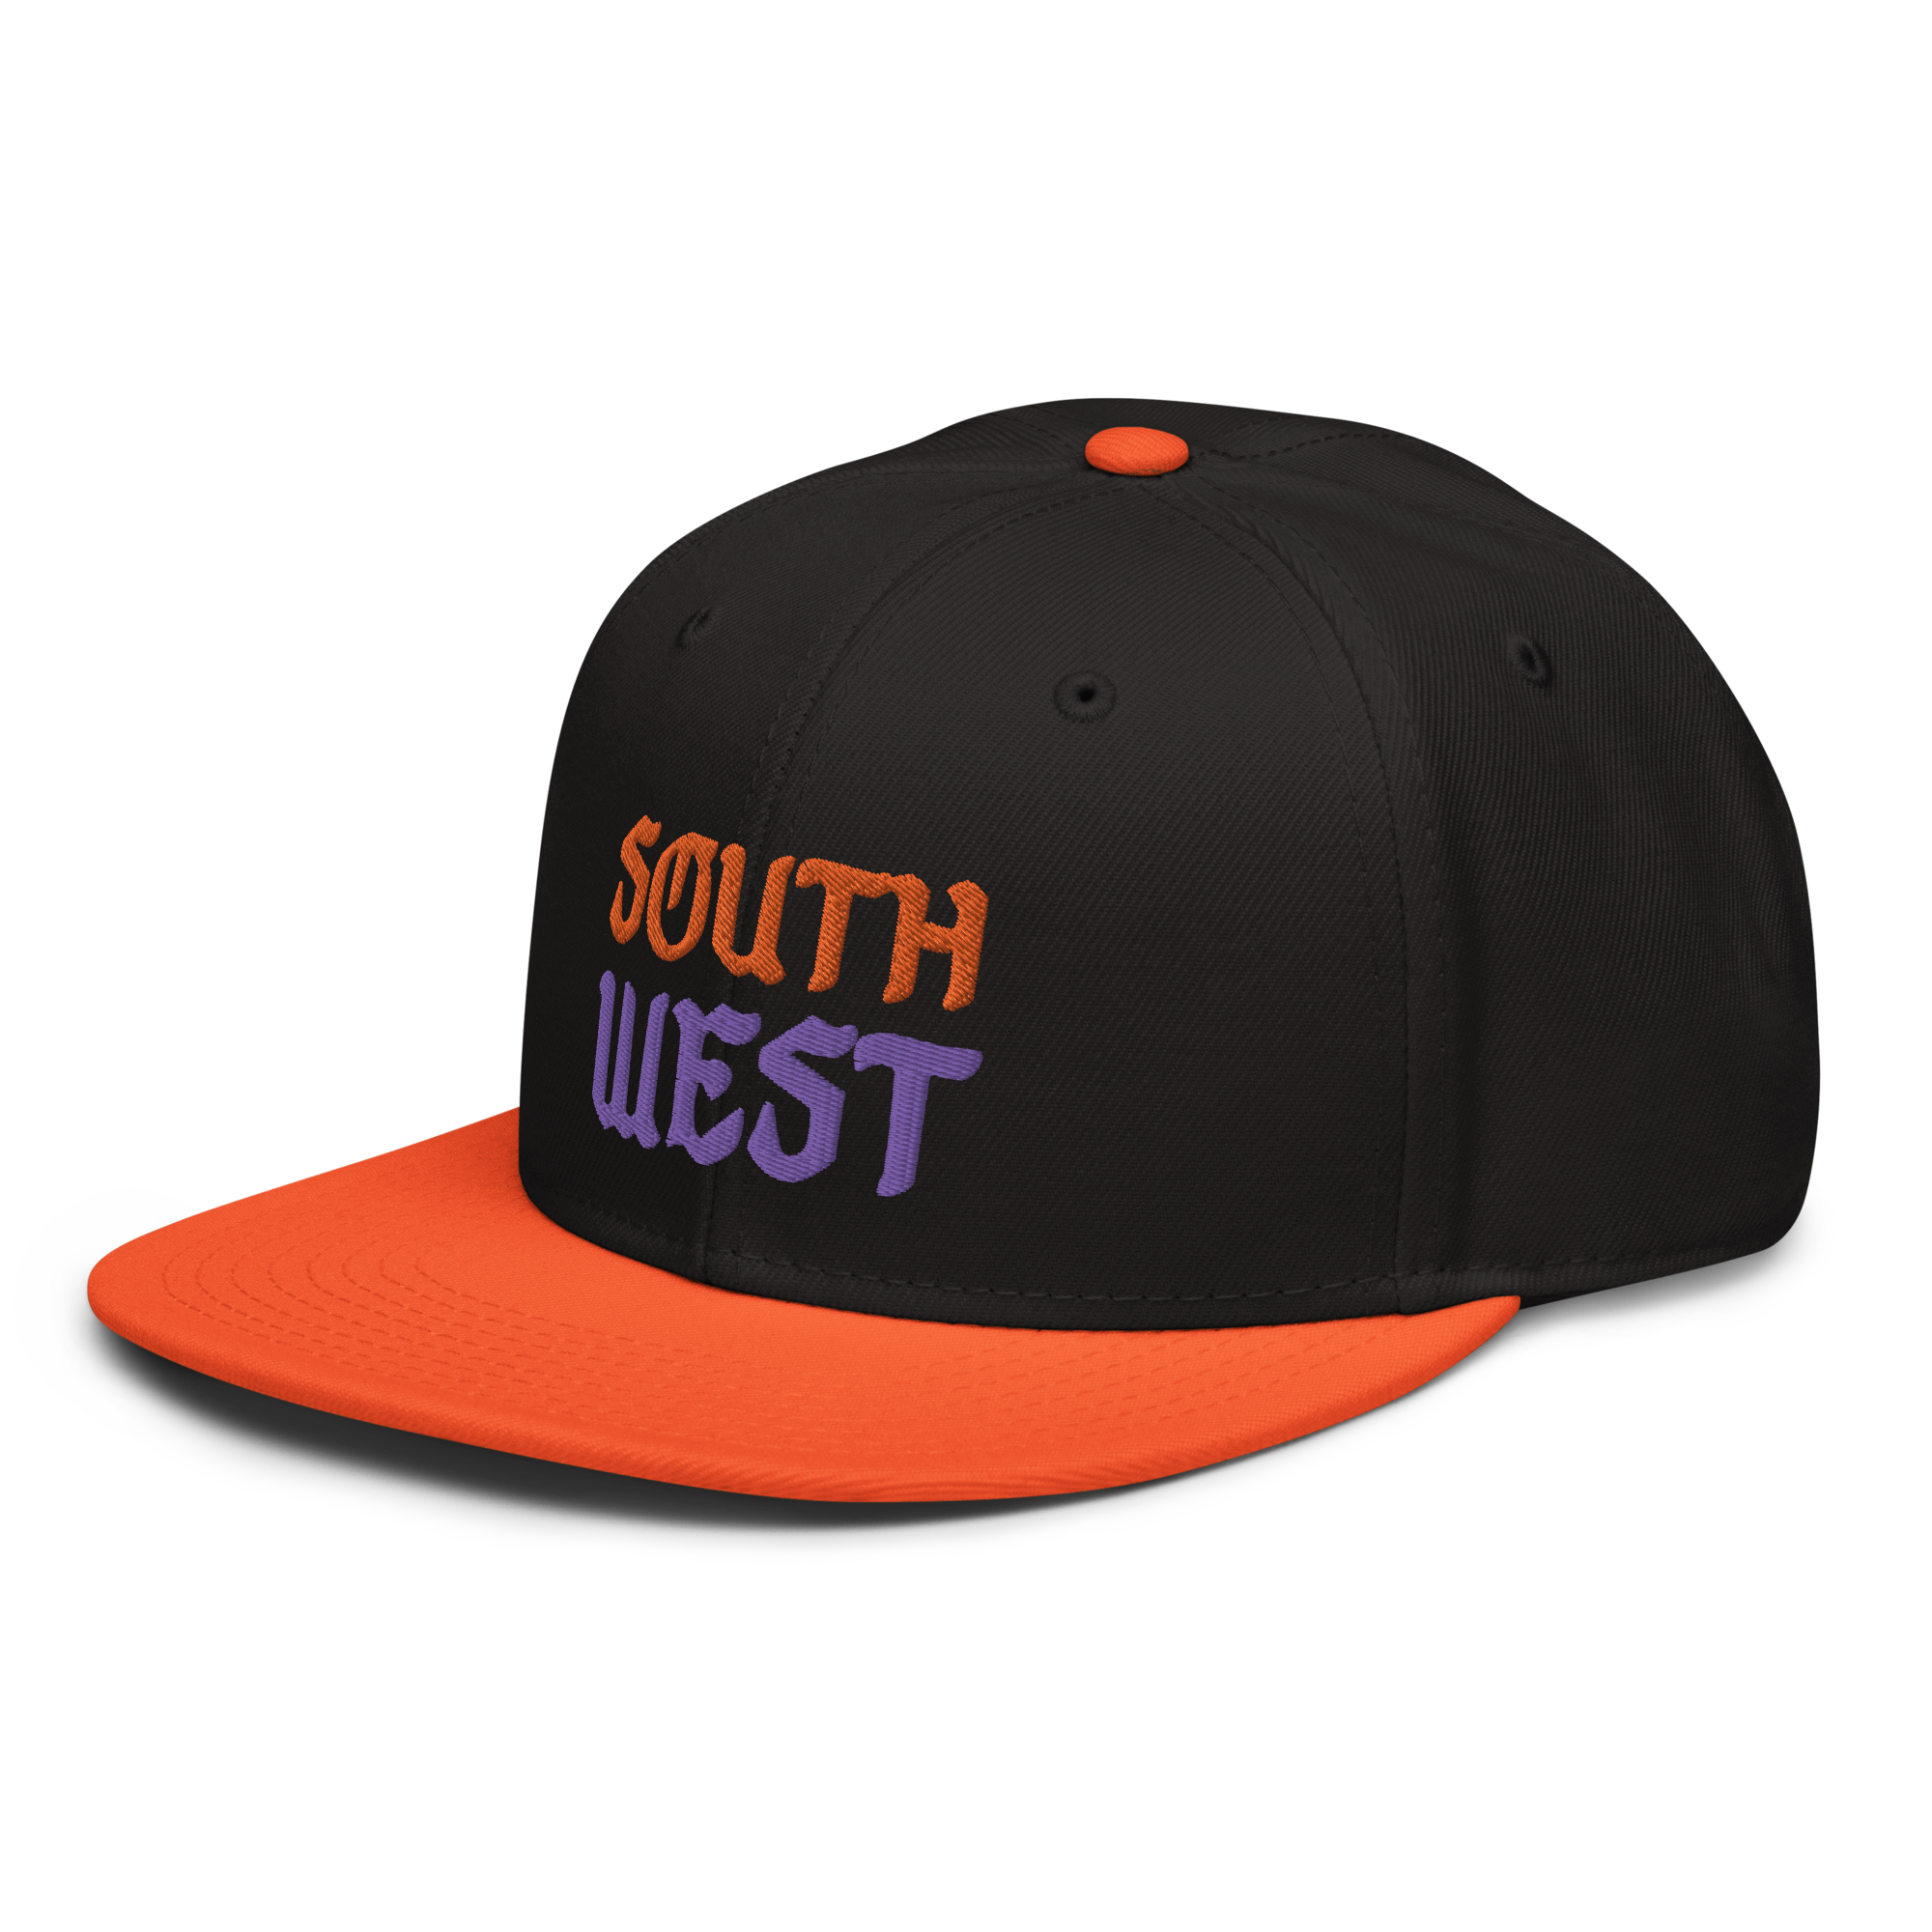 SouthWest Snapback Hat – Mountain Outfitters Organ